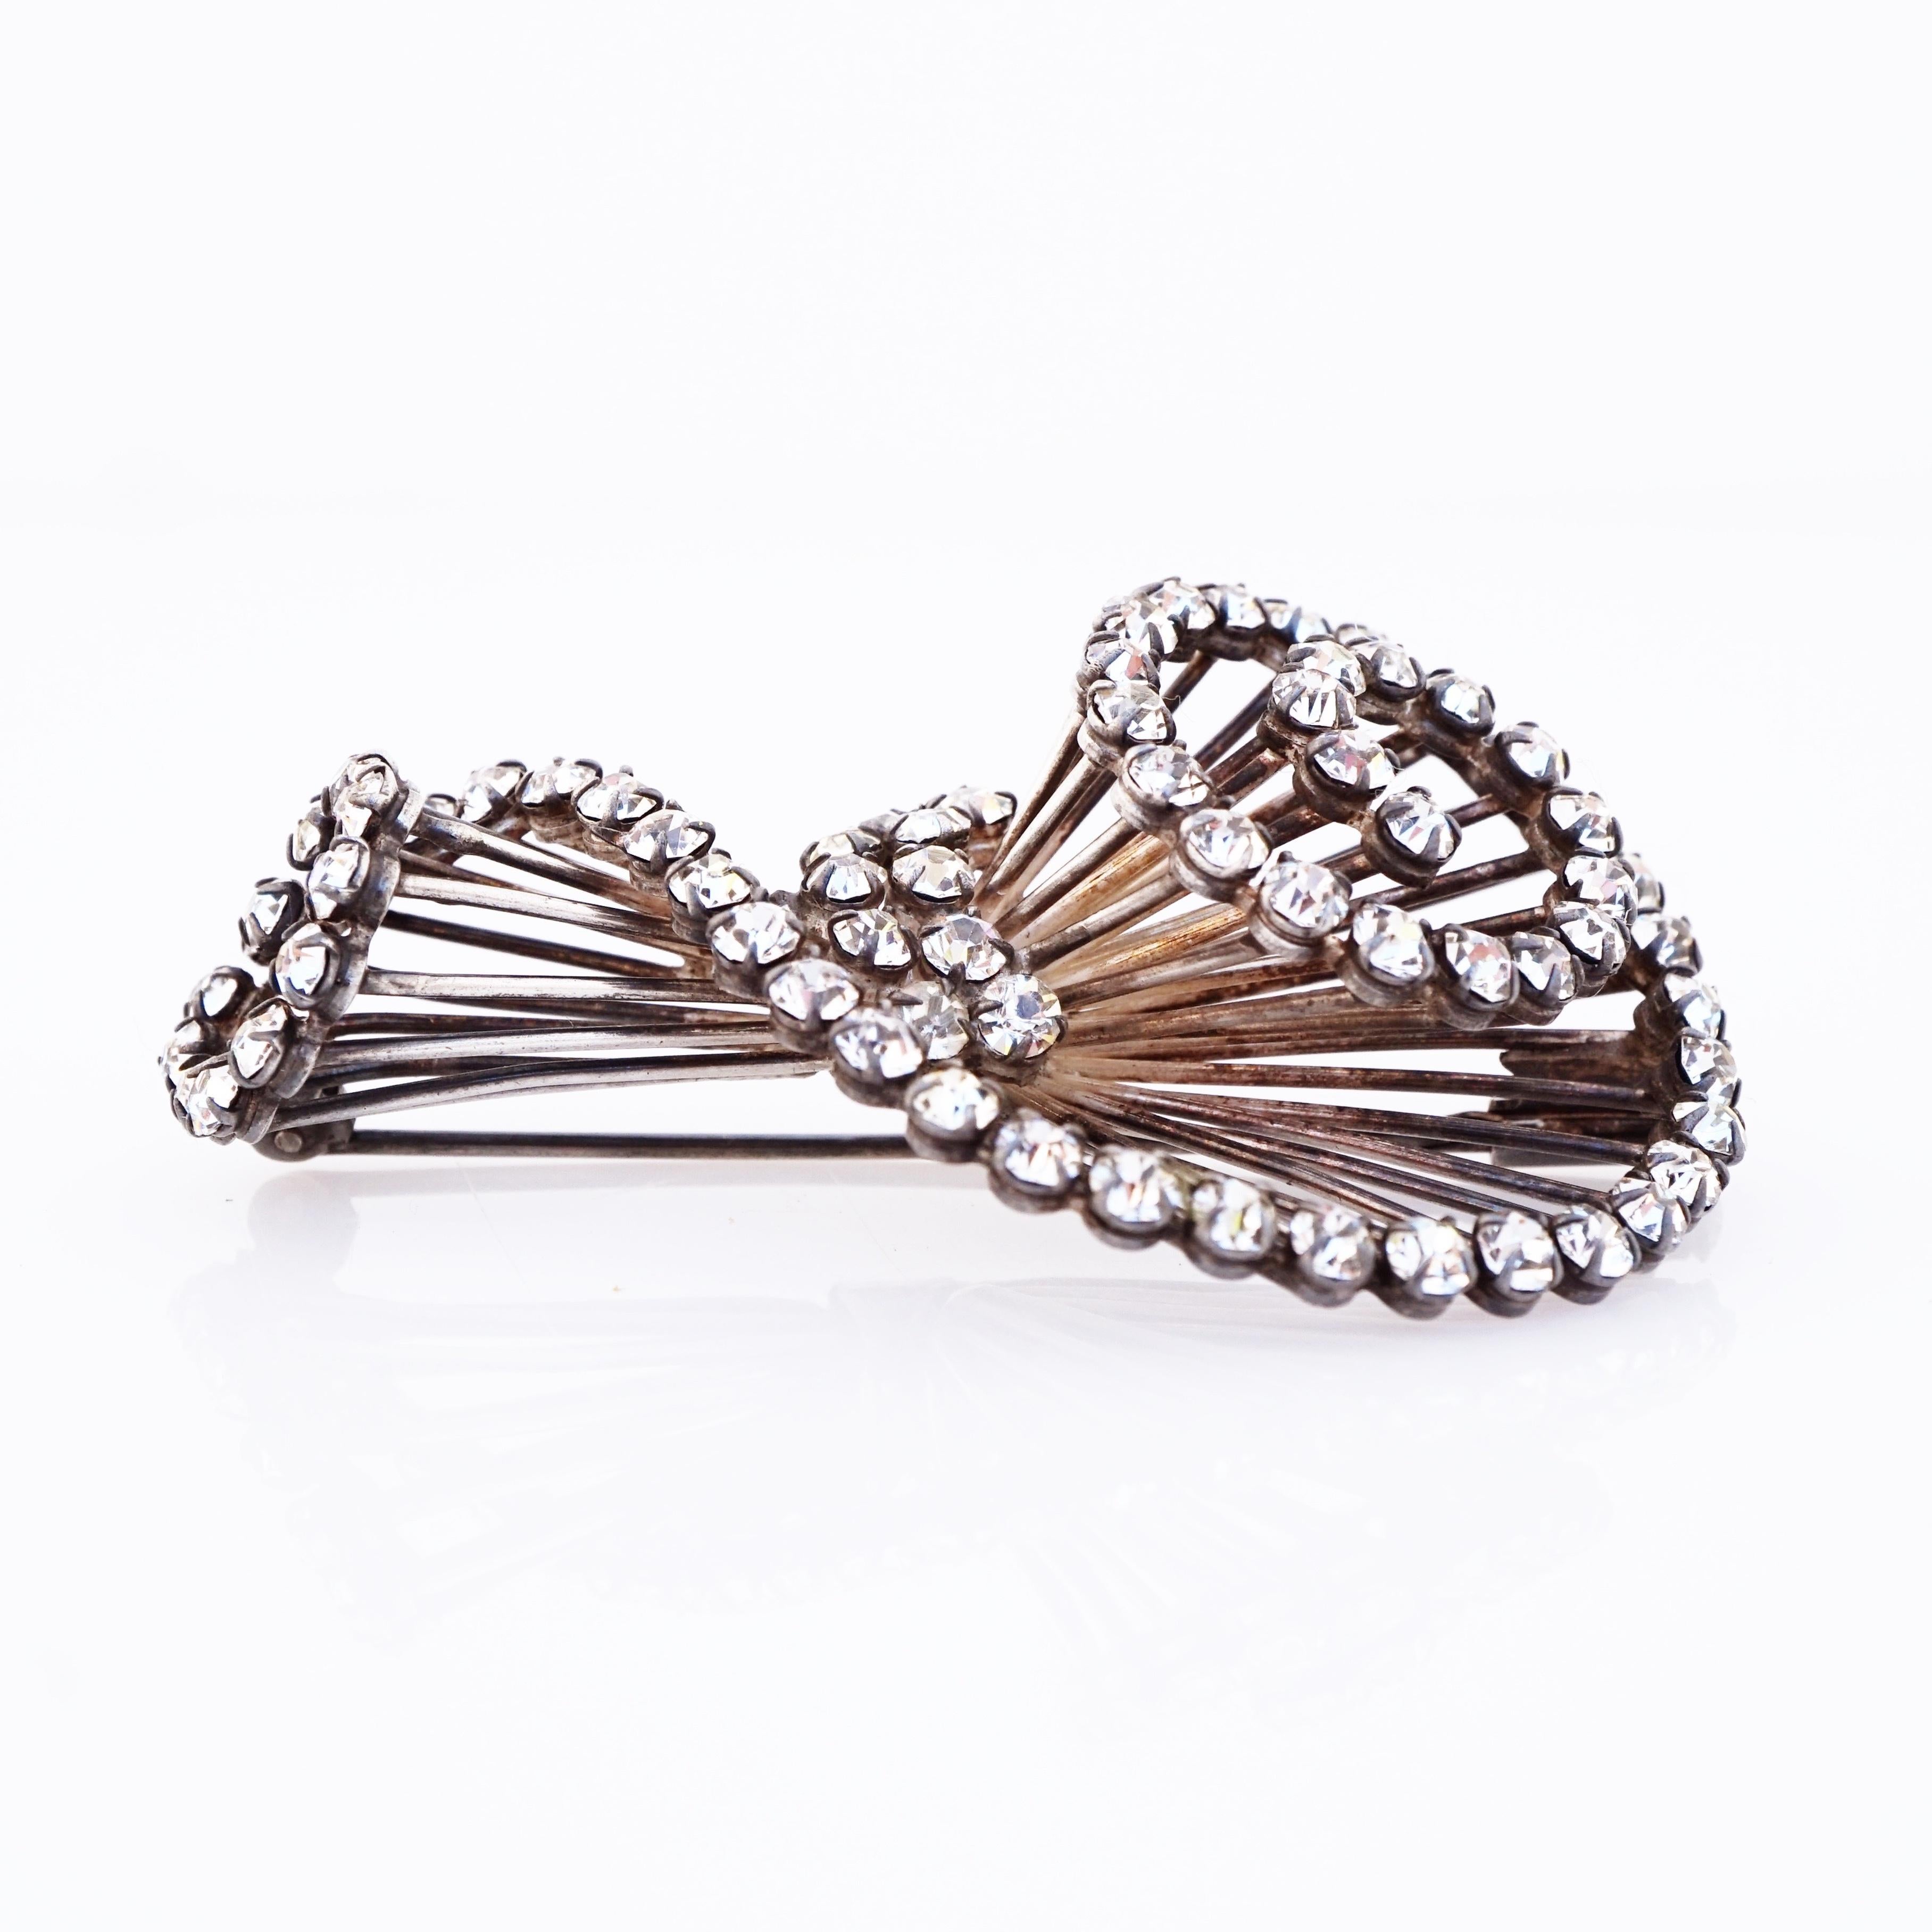 Modern Sterling Silver Swirled Wire Bunch Brooch With Crystals, 1940s